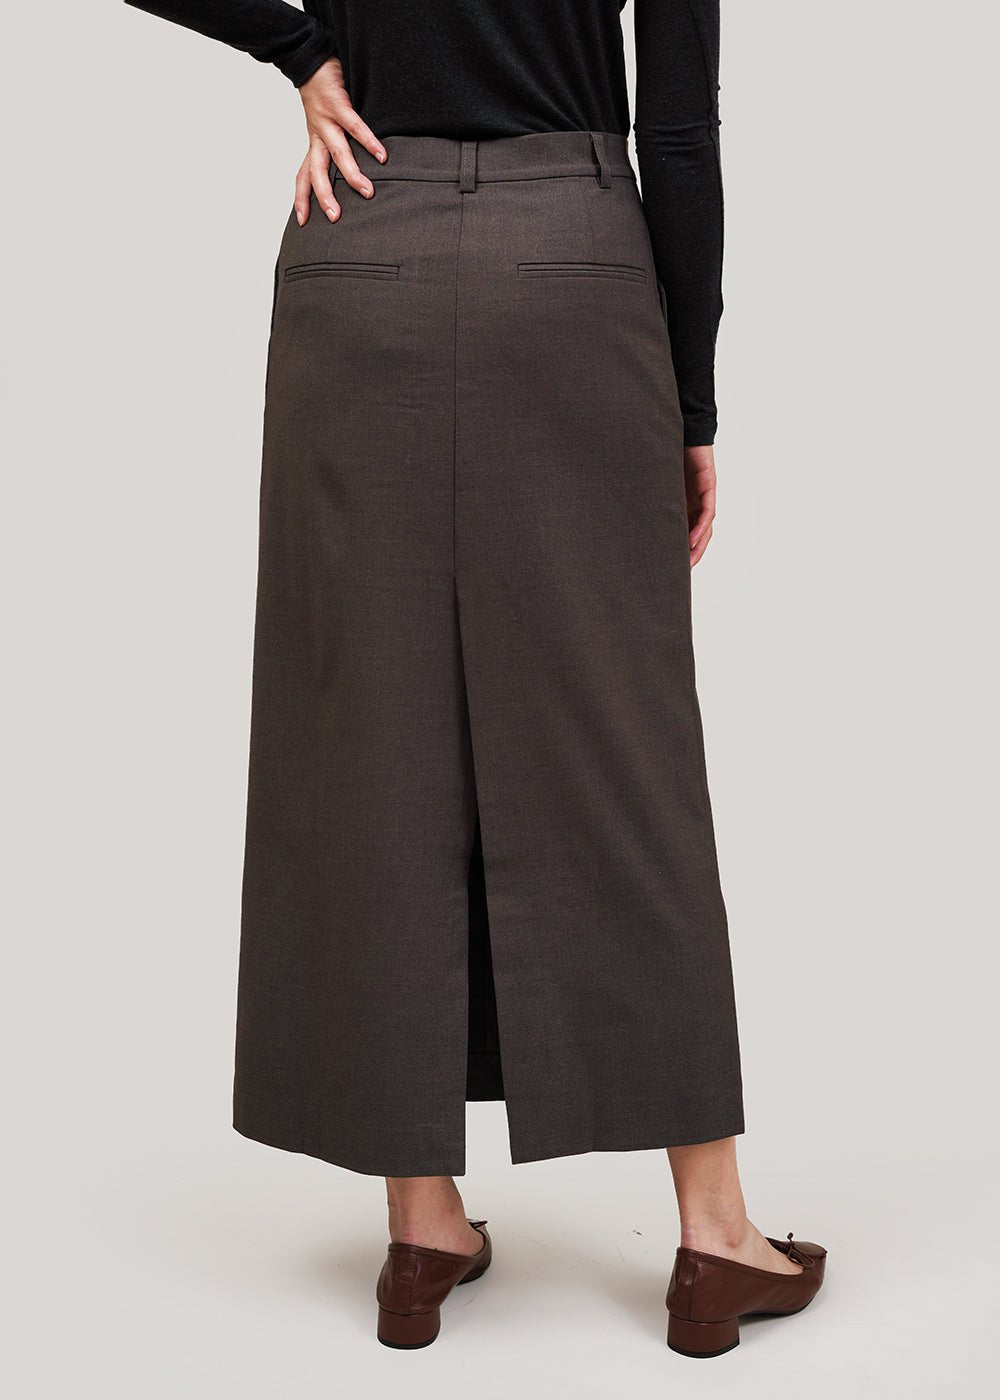 Mijeong Park Heather Brown Wool Blend Midi Skirt - New Classics Studios Sustainable Ethical Fashion Canada